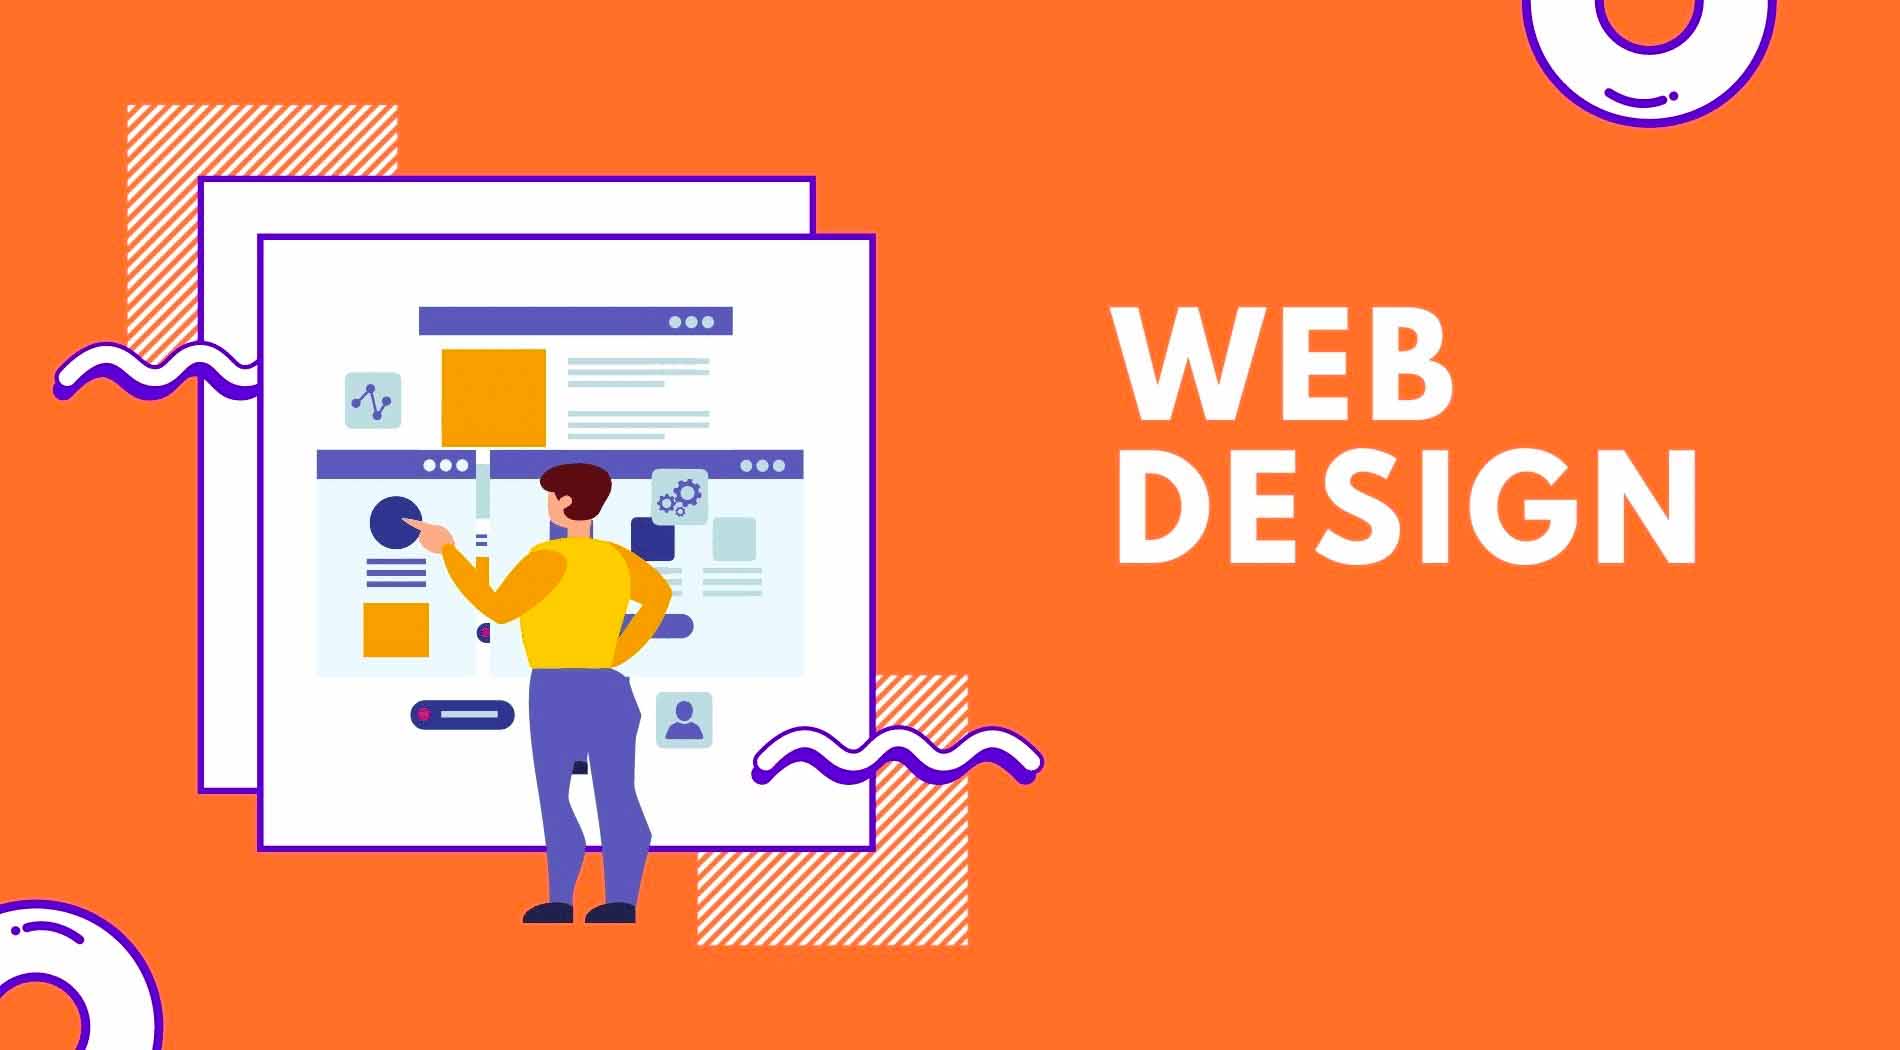 When it comes to good website performance, design counts